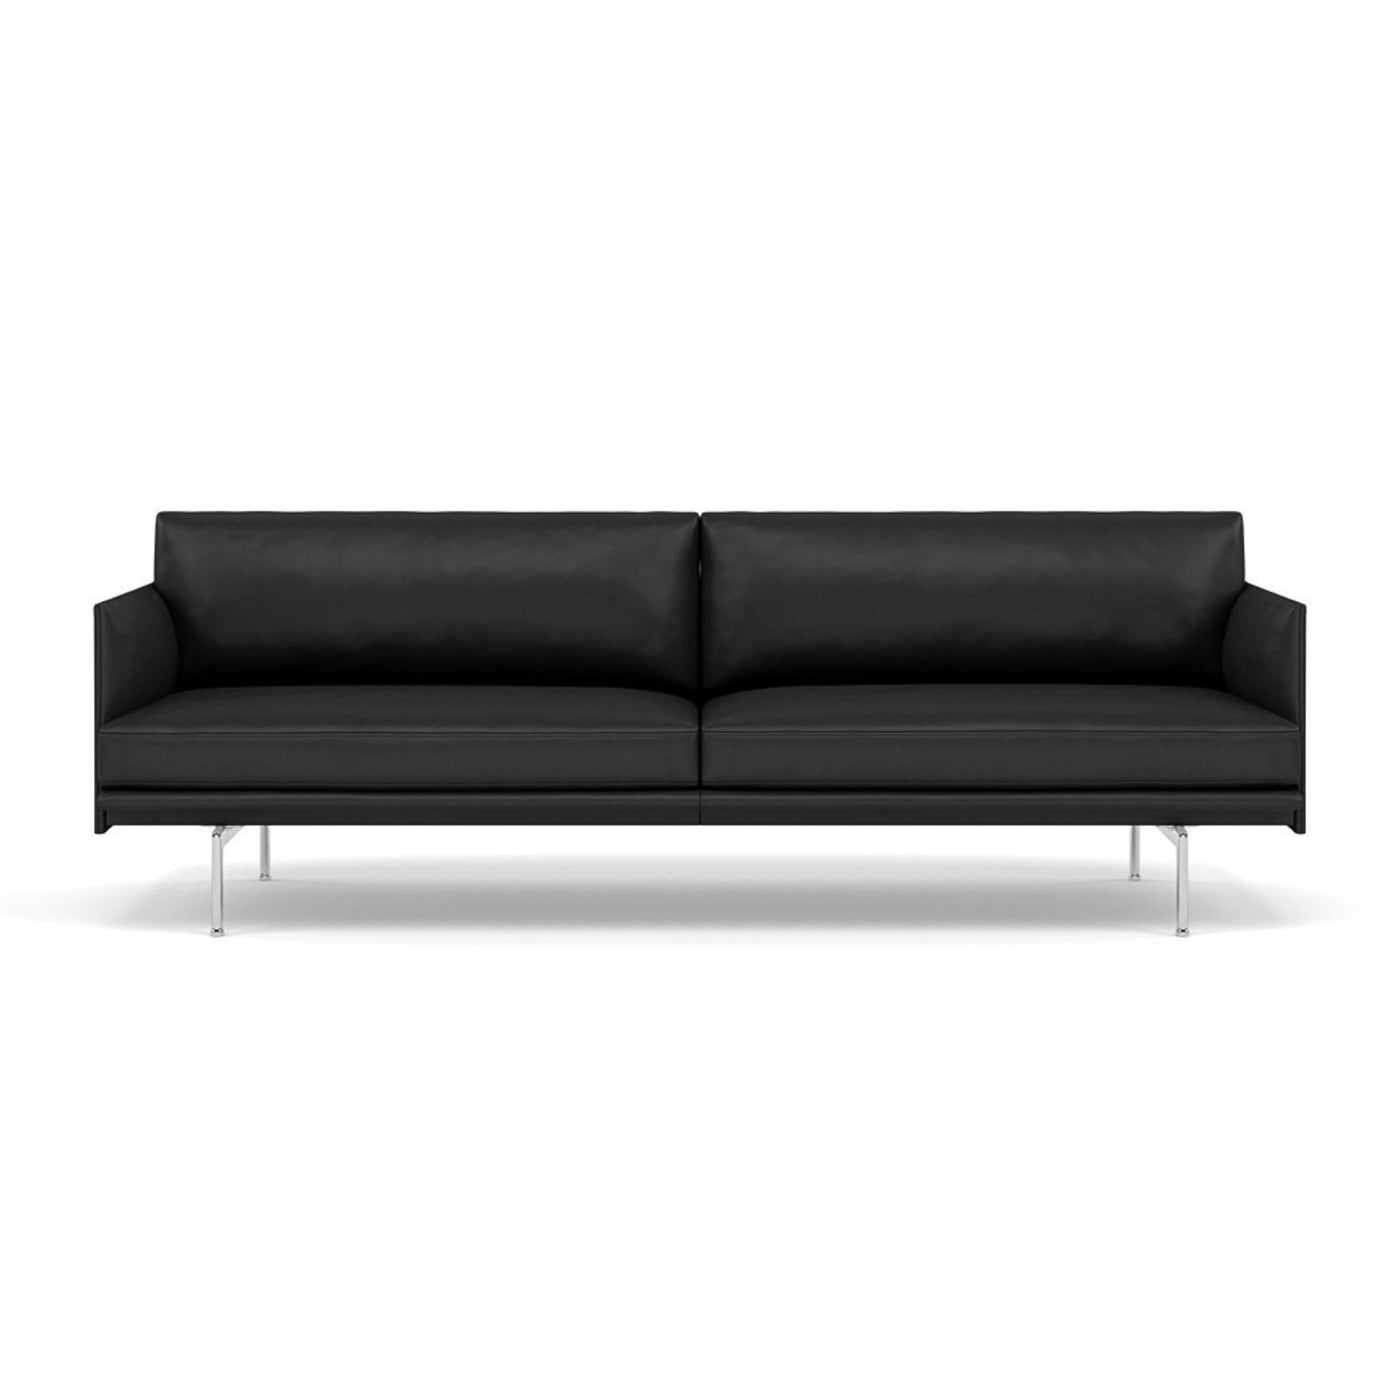 Muuto Outline Studio Sofa 220 in black refine leather and polished aluminium legs. Made to order from someday designs. #colour_black-refine-leather